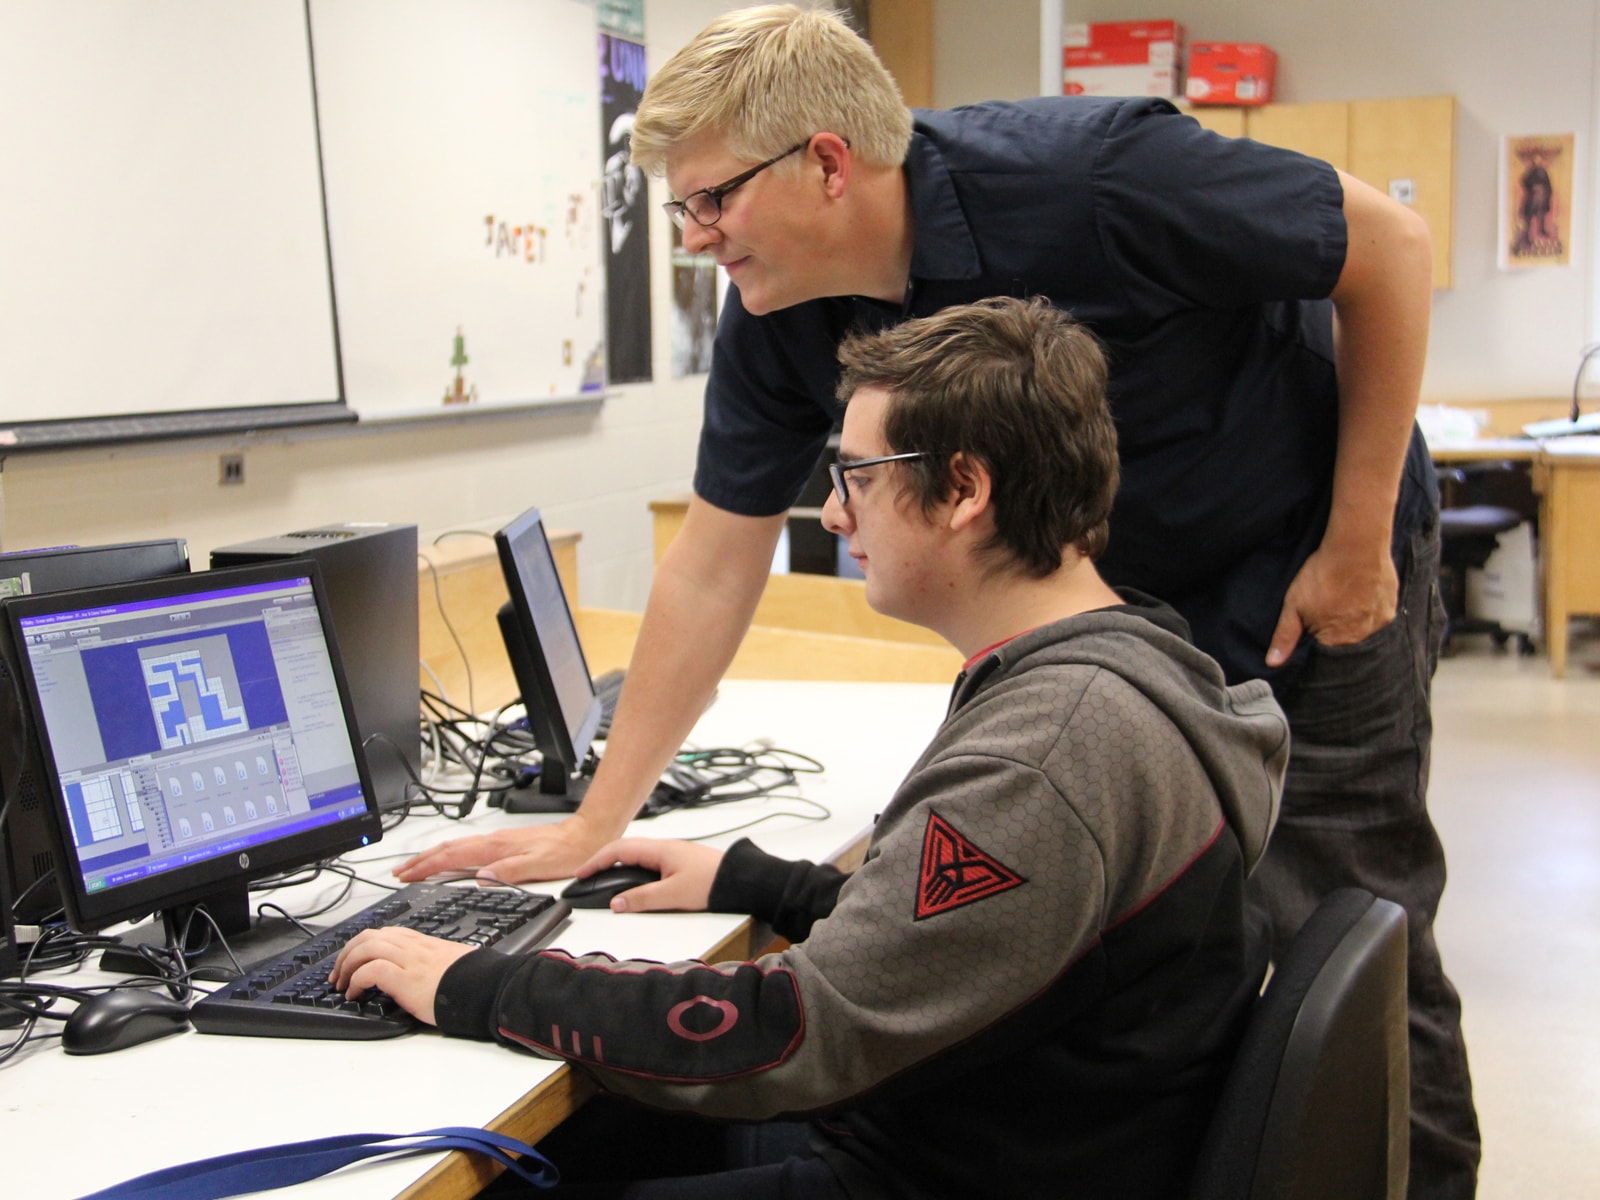 Student and teacher looking at a computer monitor in a Kamloops, British Columbia classroom